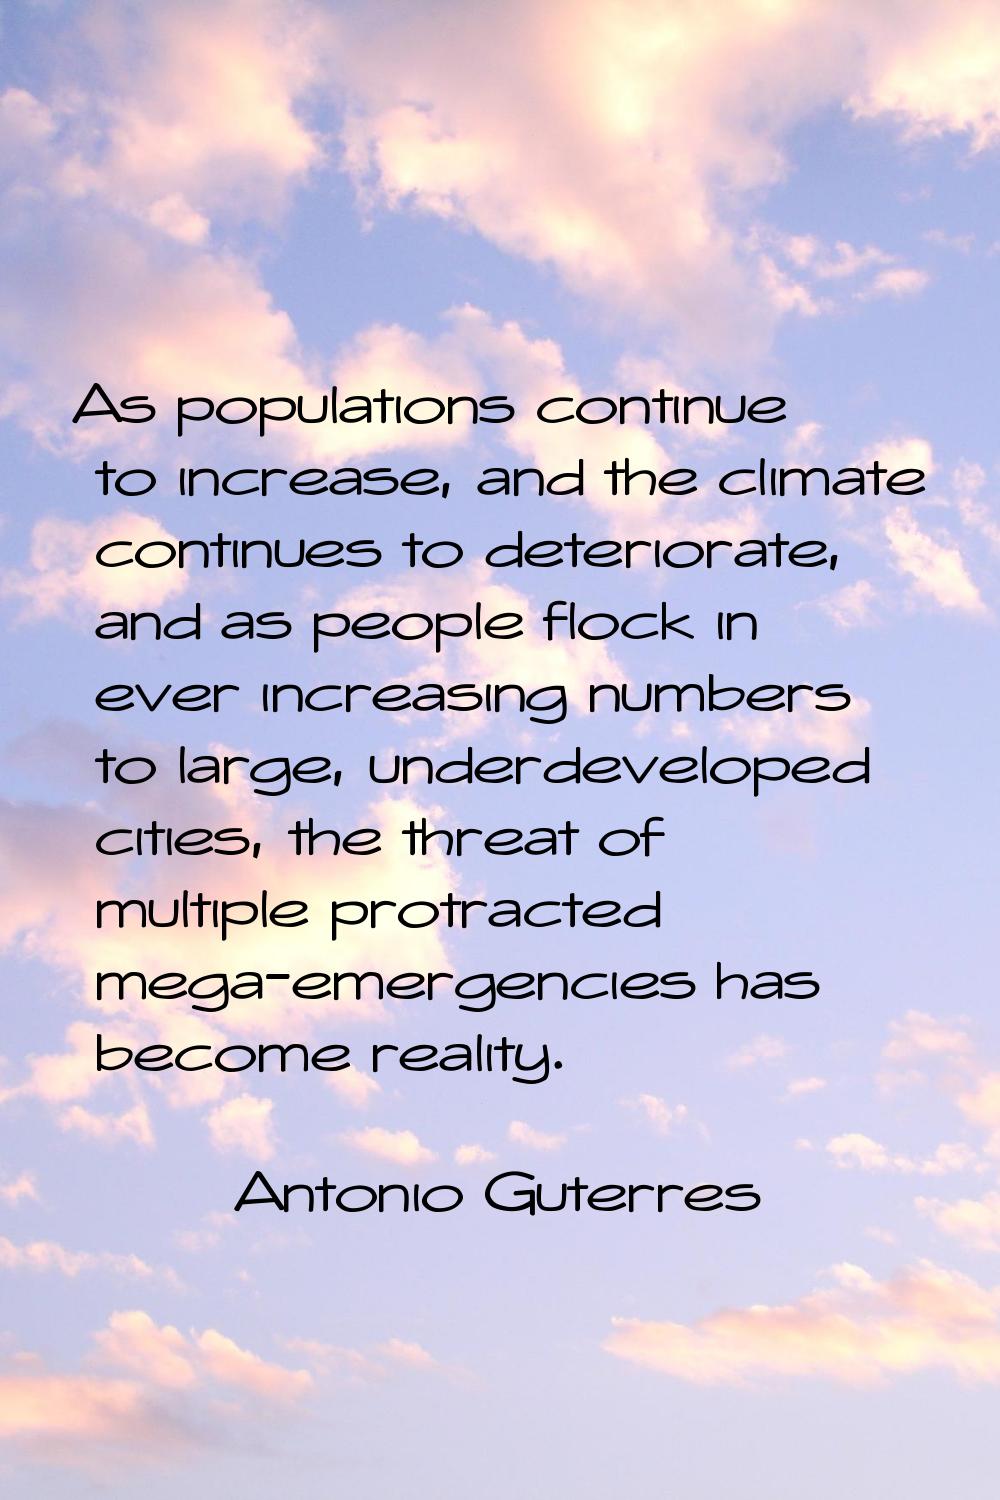 As populations continue to increase, and the climate continues to deteriorate, and as people flock 